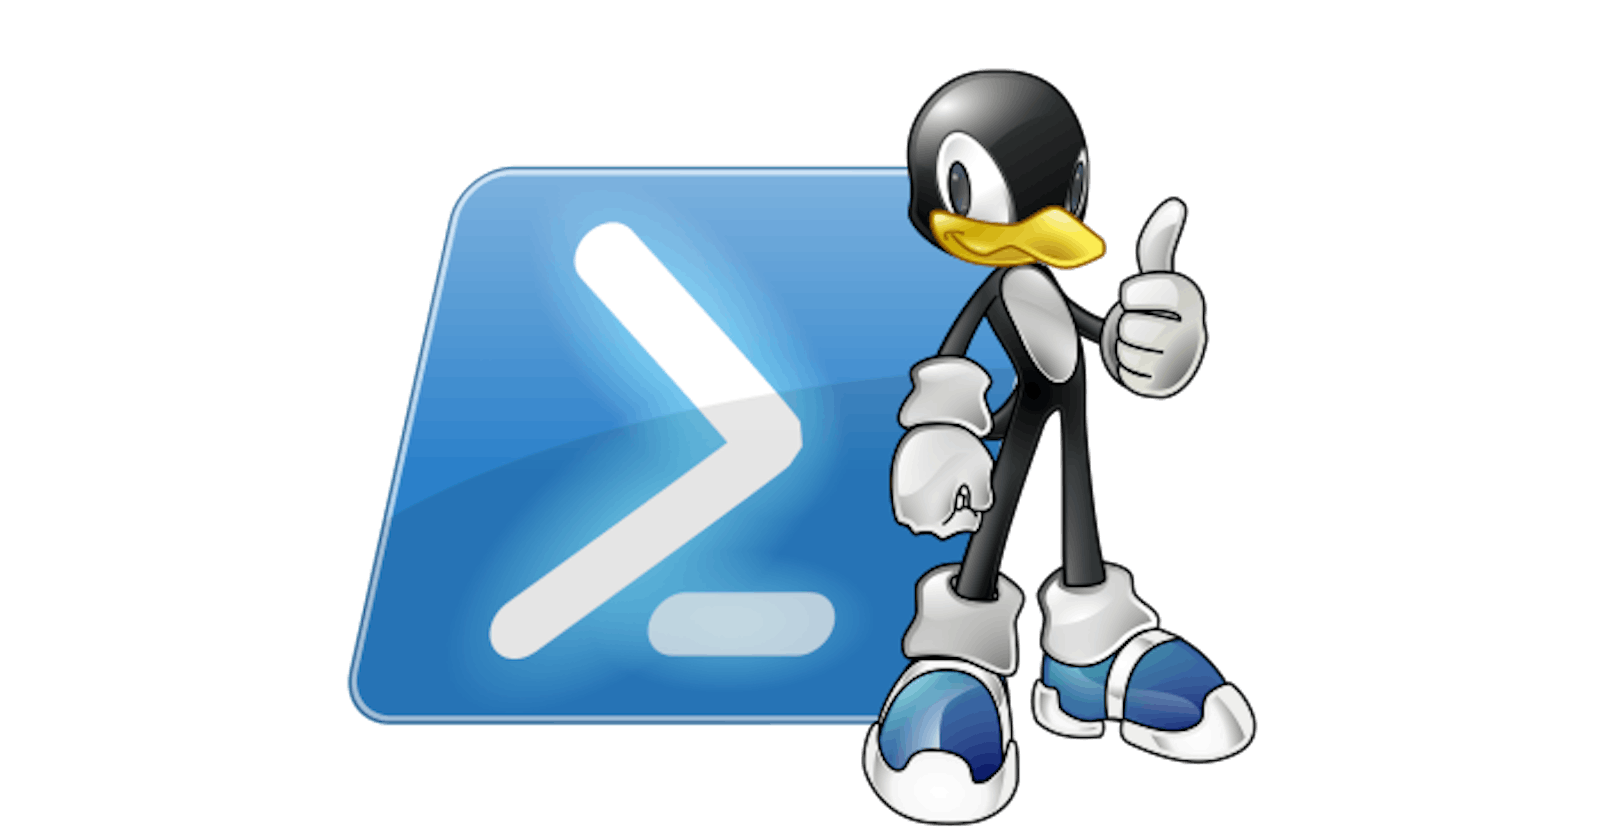 PowerShell Is Available for Linux, MacOS and is Open Source!